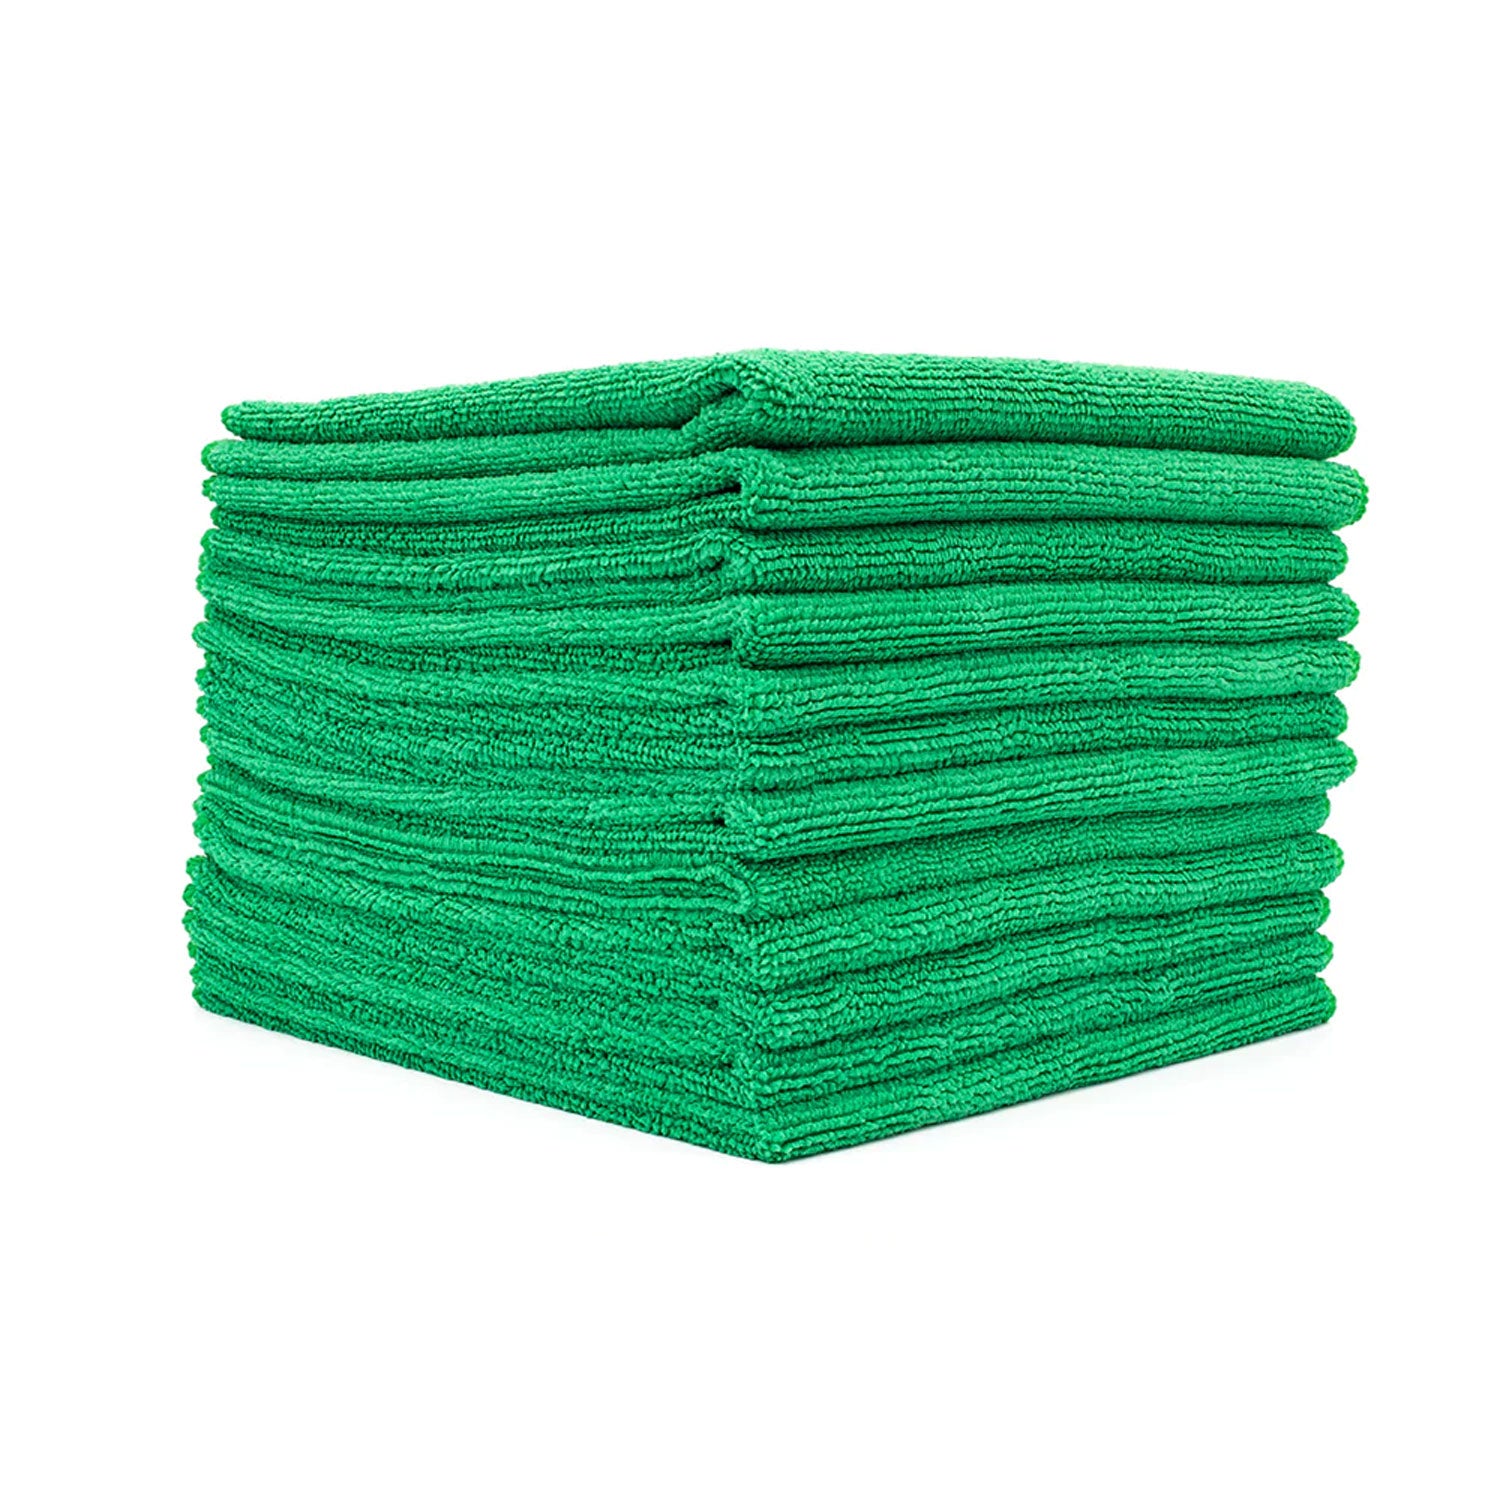 terry-cloth-microfiber-all-purpose-towels-12-pack-green